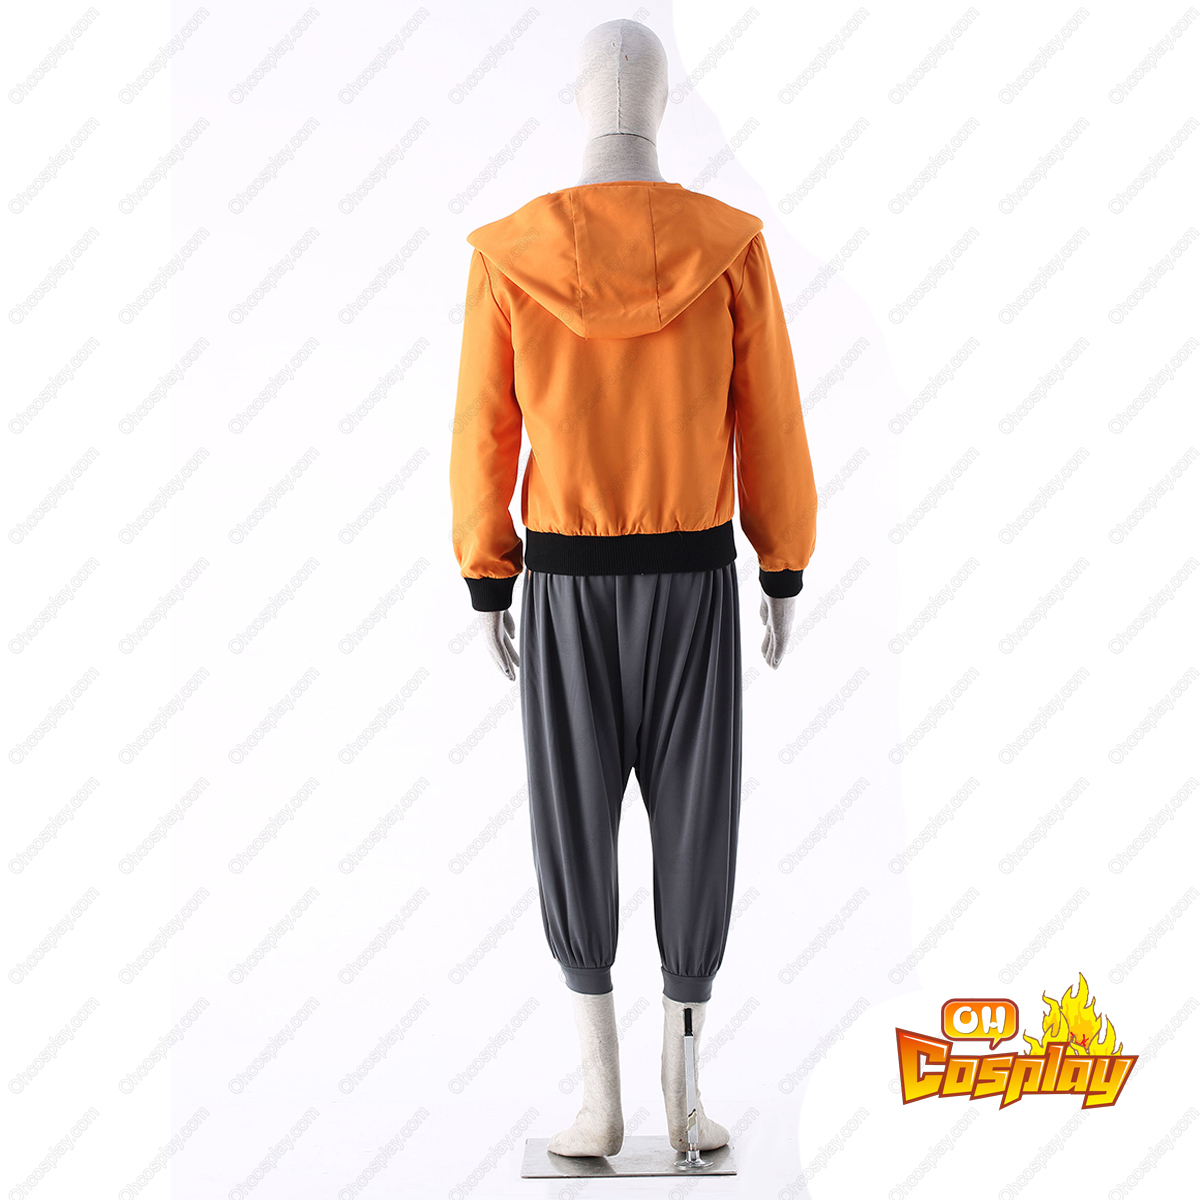 Naruto The Last Naruto 9TH Cosplay Costumes Deluxe Edition